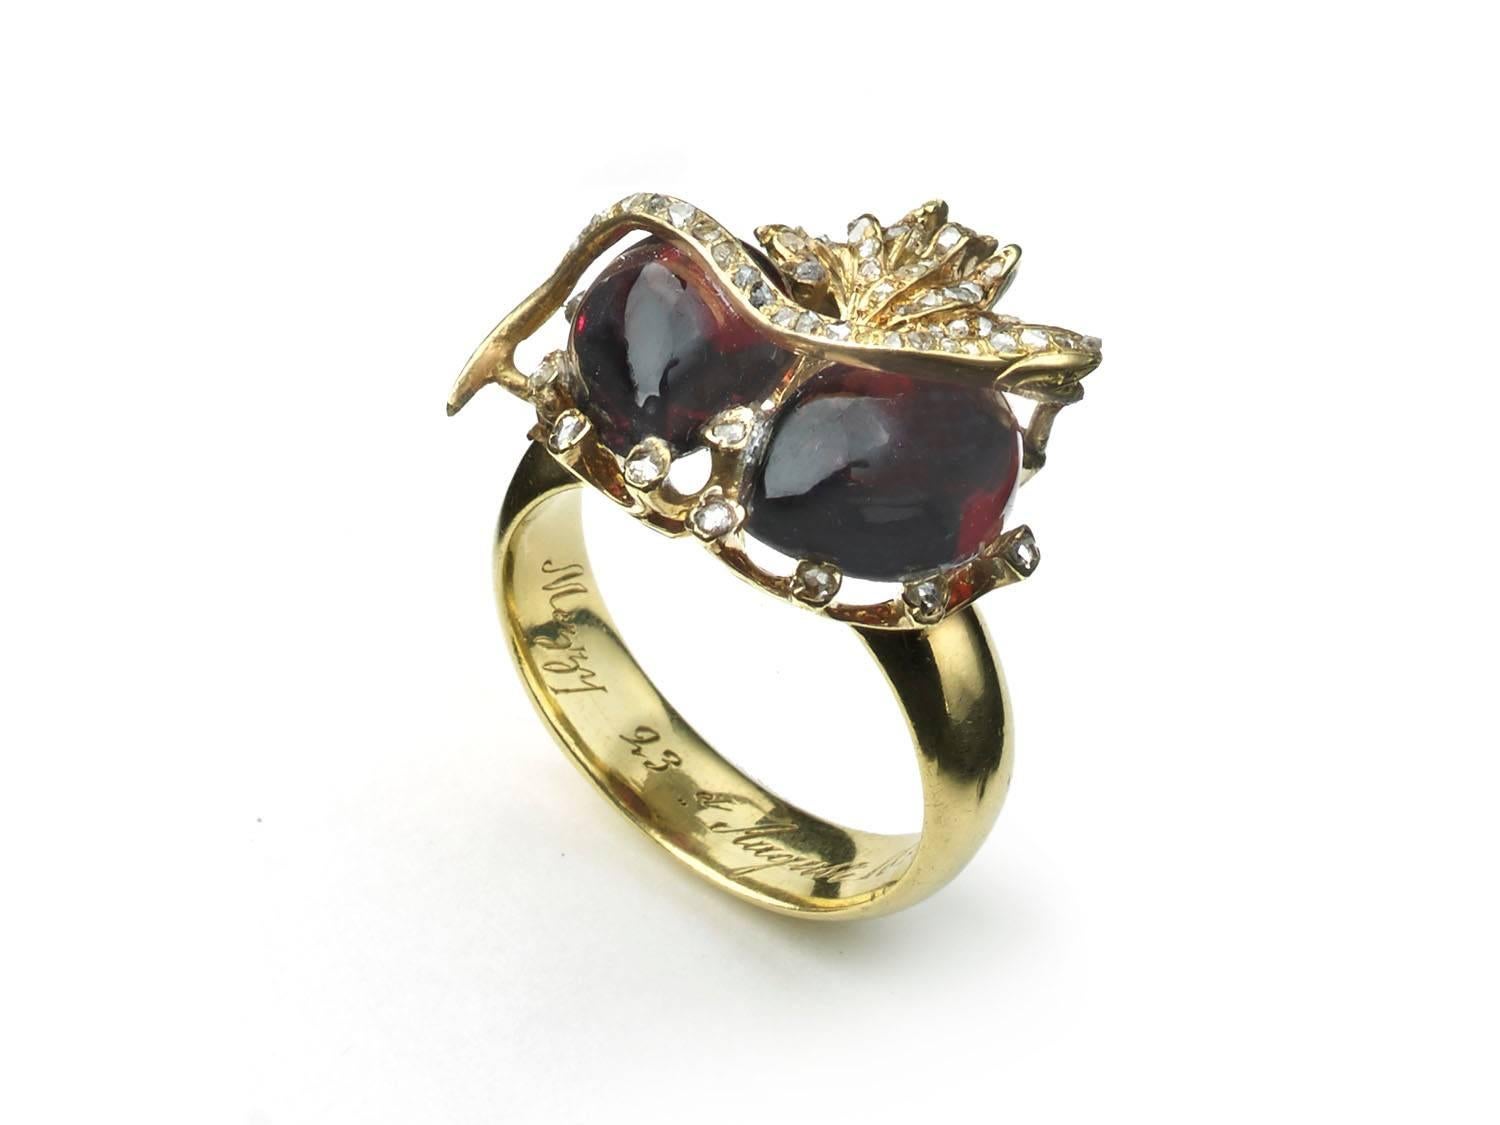 An antique snake and double garnet ring, set with two, cabochon-cut, pear shape garnets, with surrounding claws set with rose-cut diamonds, with a superimposed gold snake, set with rose-cut diamonds, with a rose-cut diamond set gold flame at the